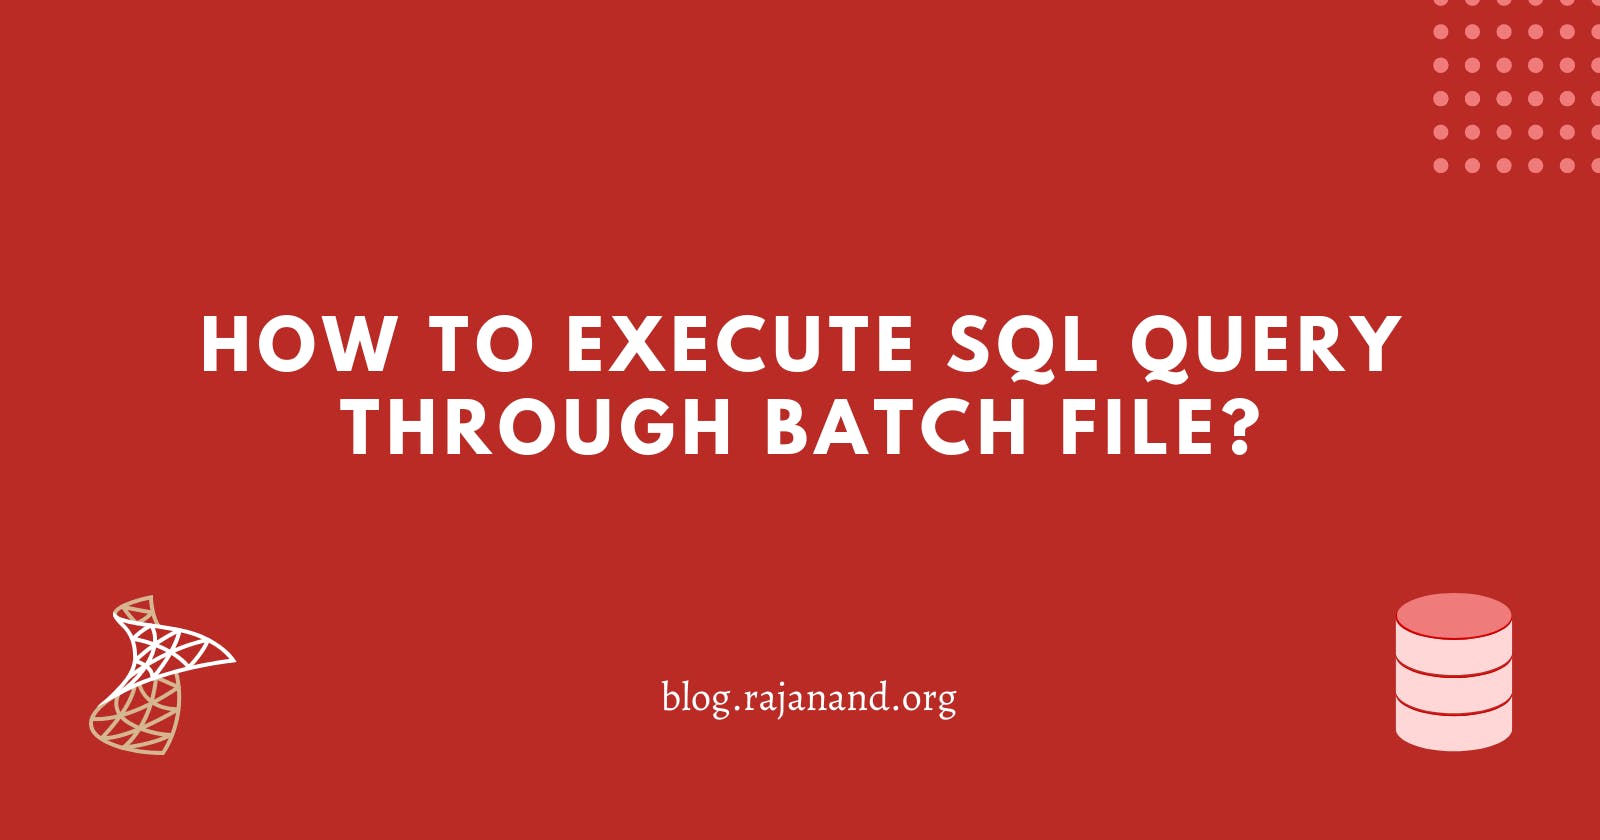 How to execute SQL commands within a batch file?